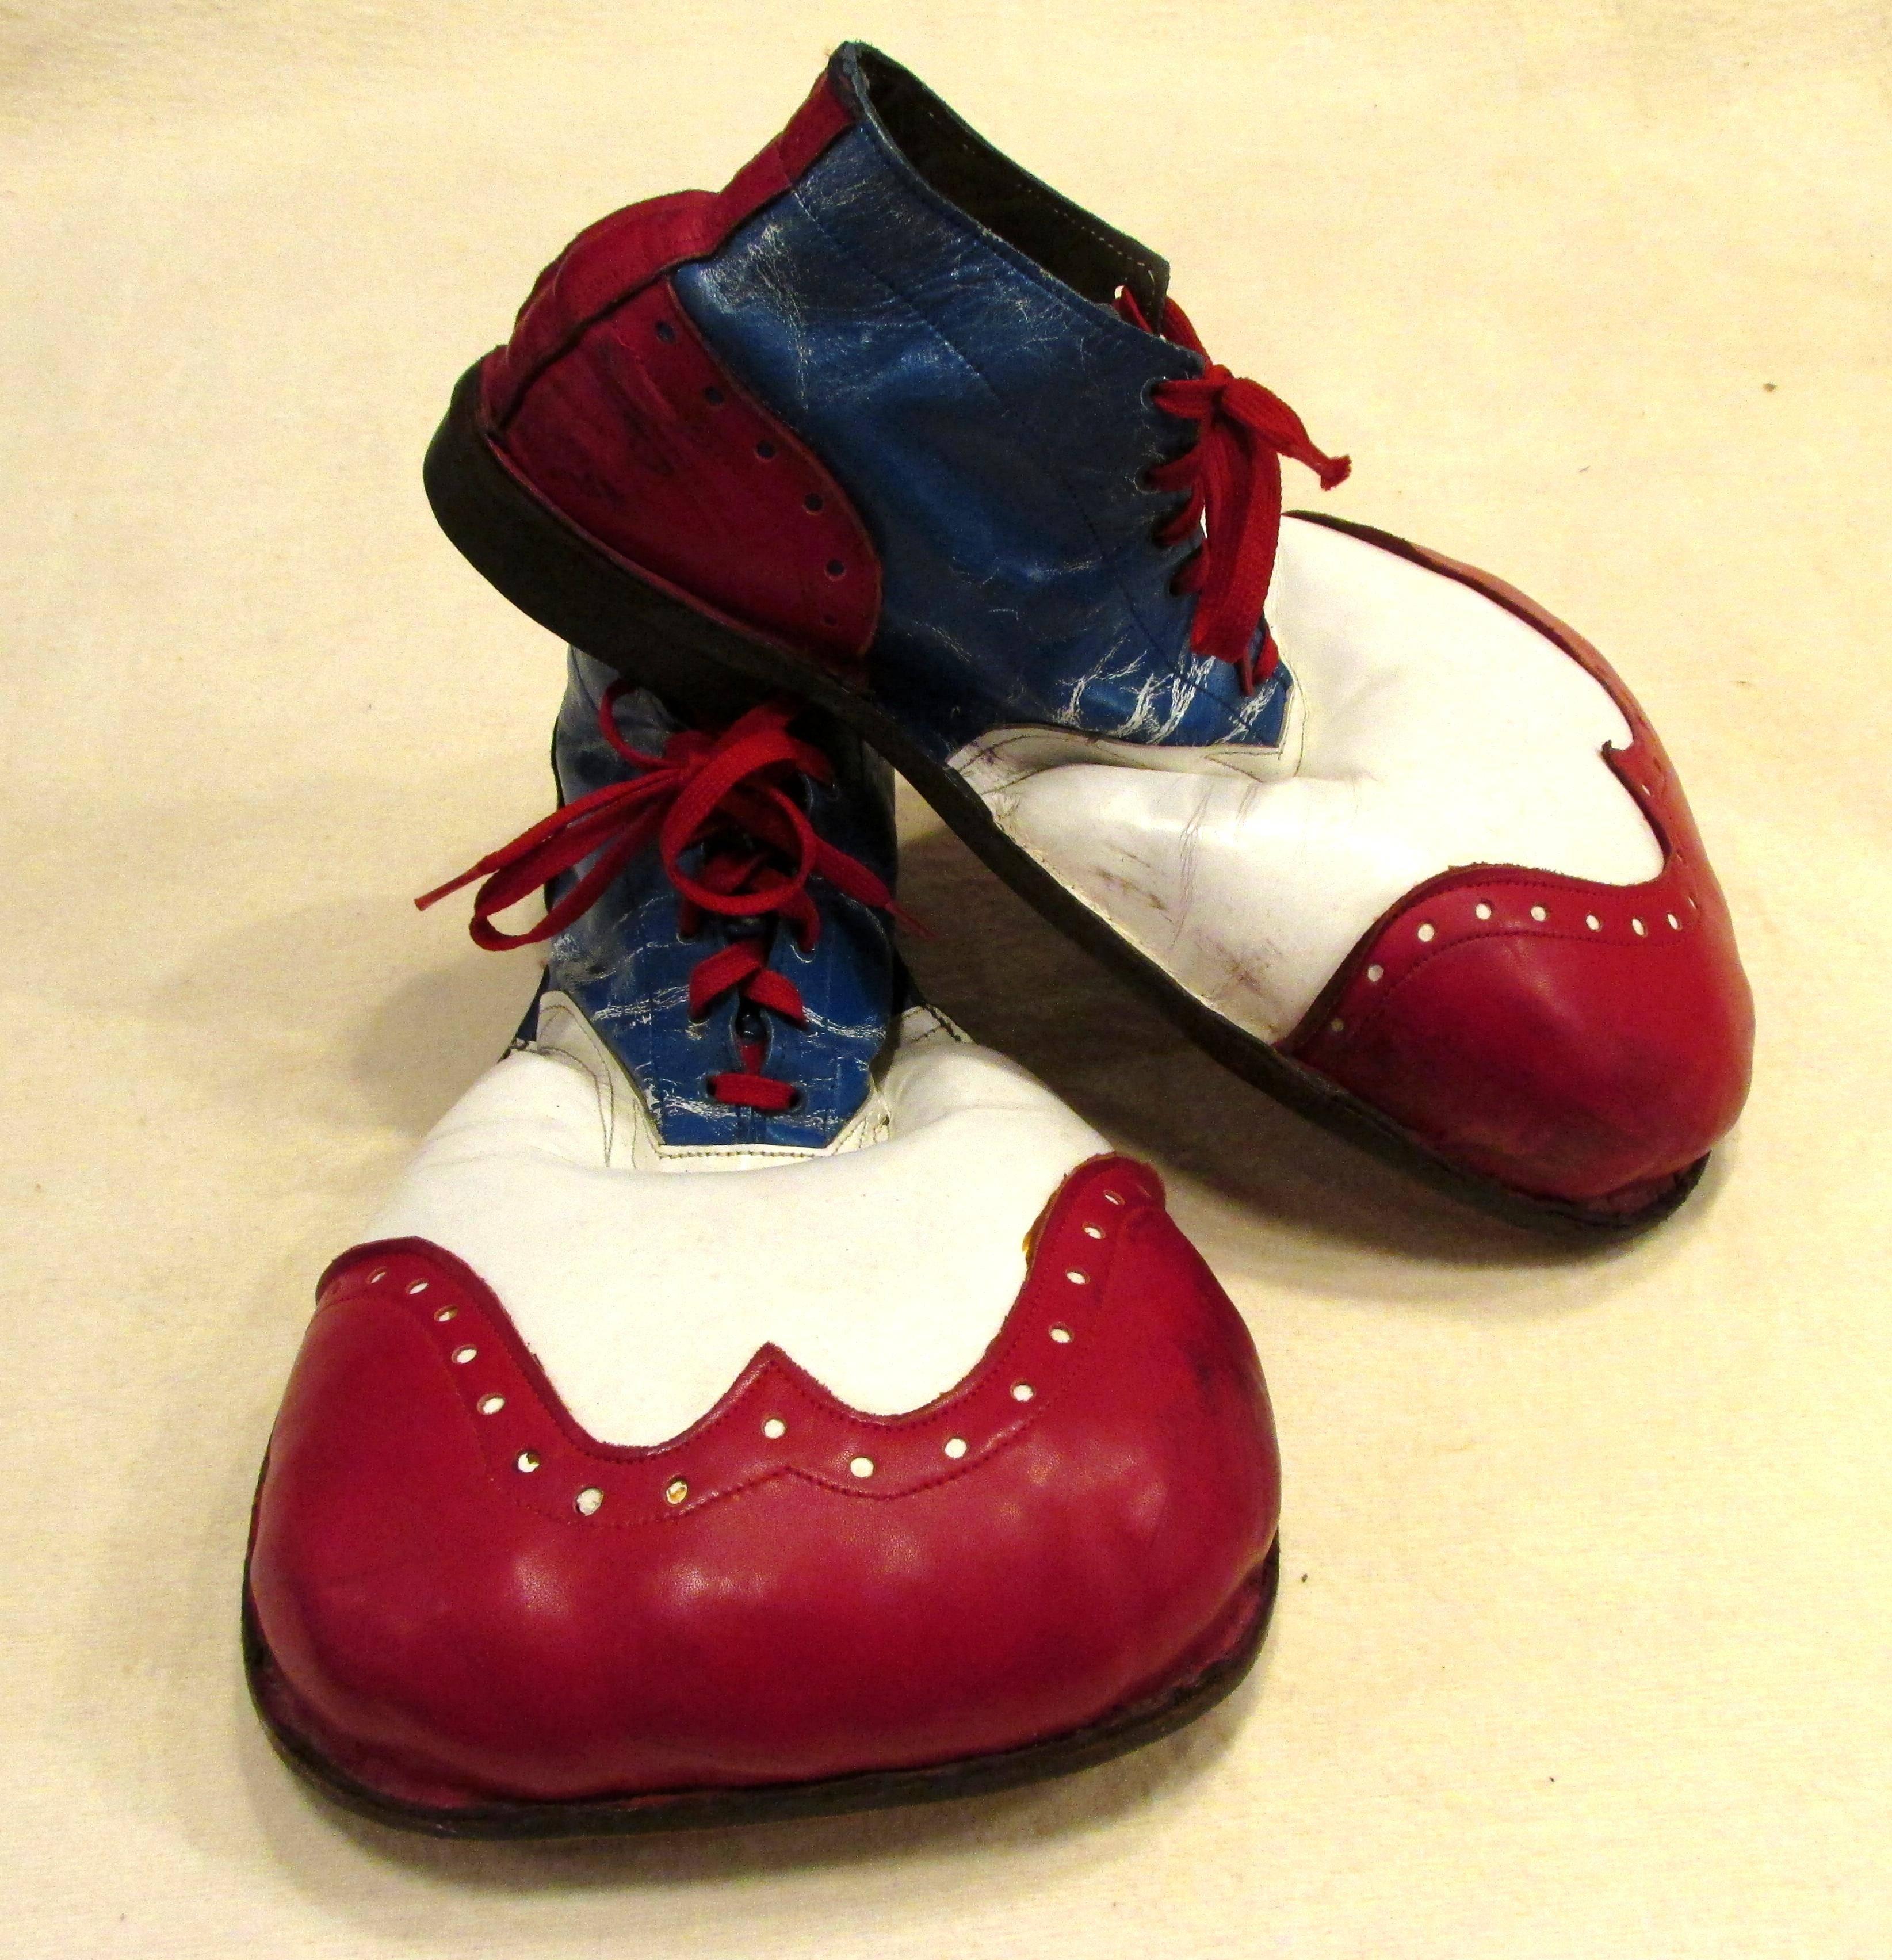 Pair of red white and blue leather vintage clown shoes with big toes and leather and rubber soles
From my collection of vintage Clown Shoes